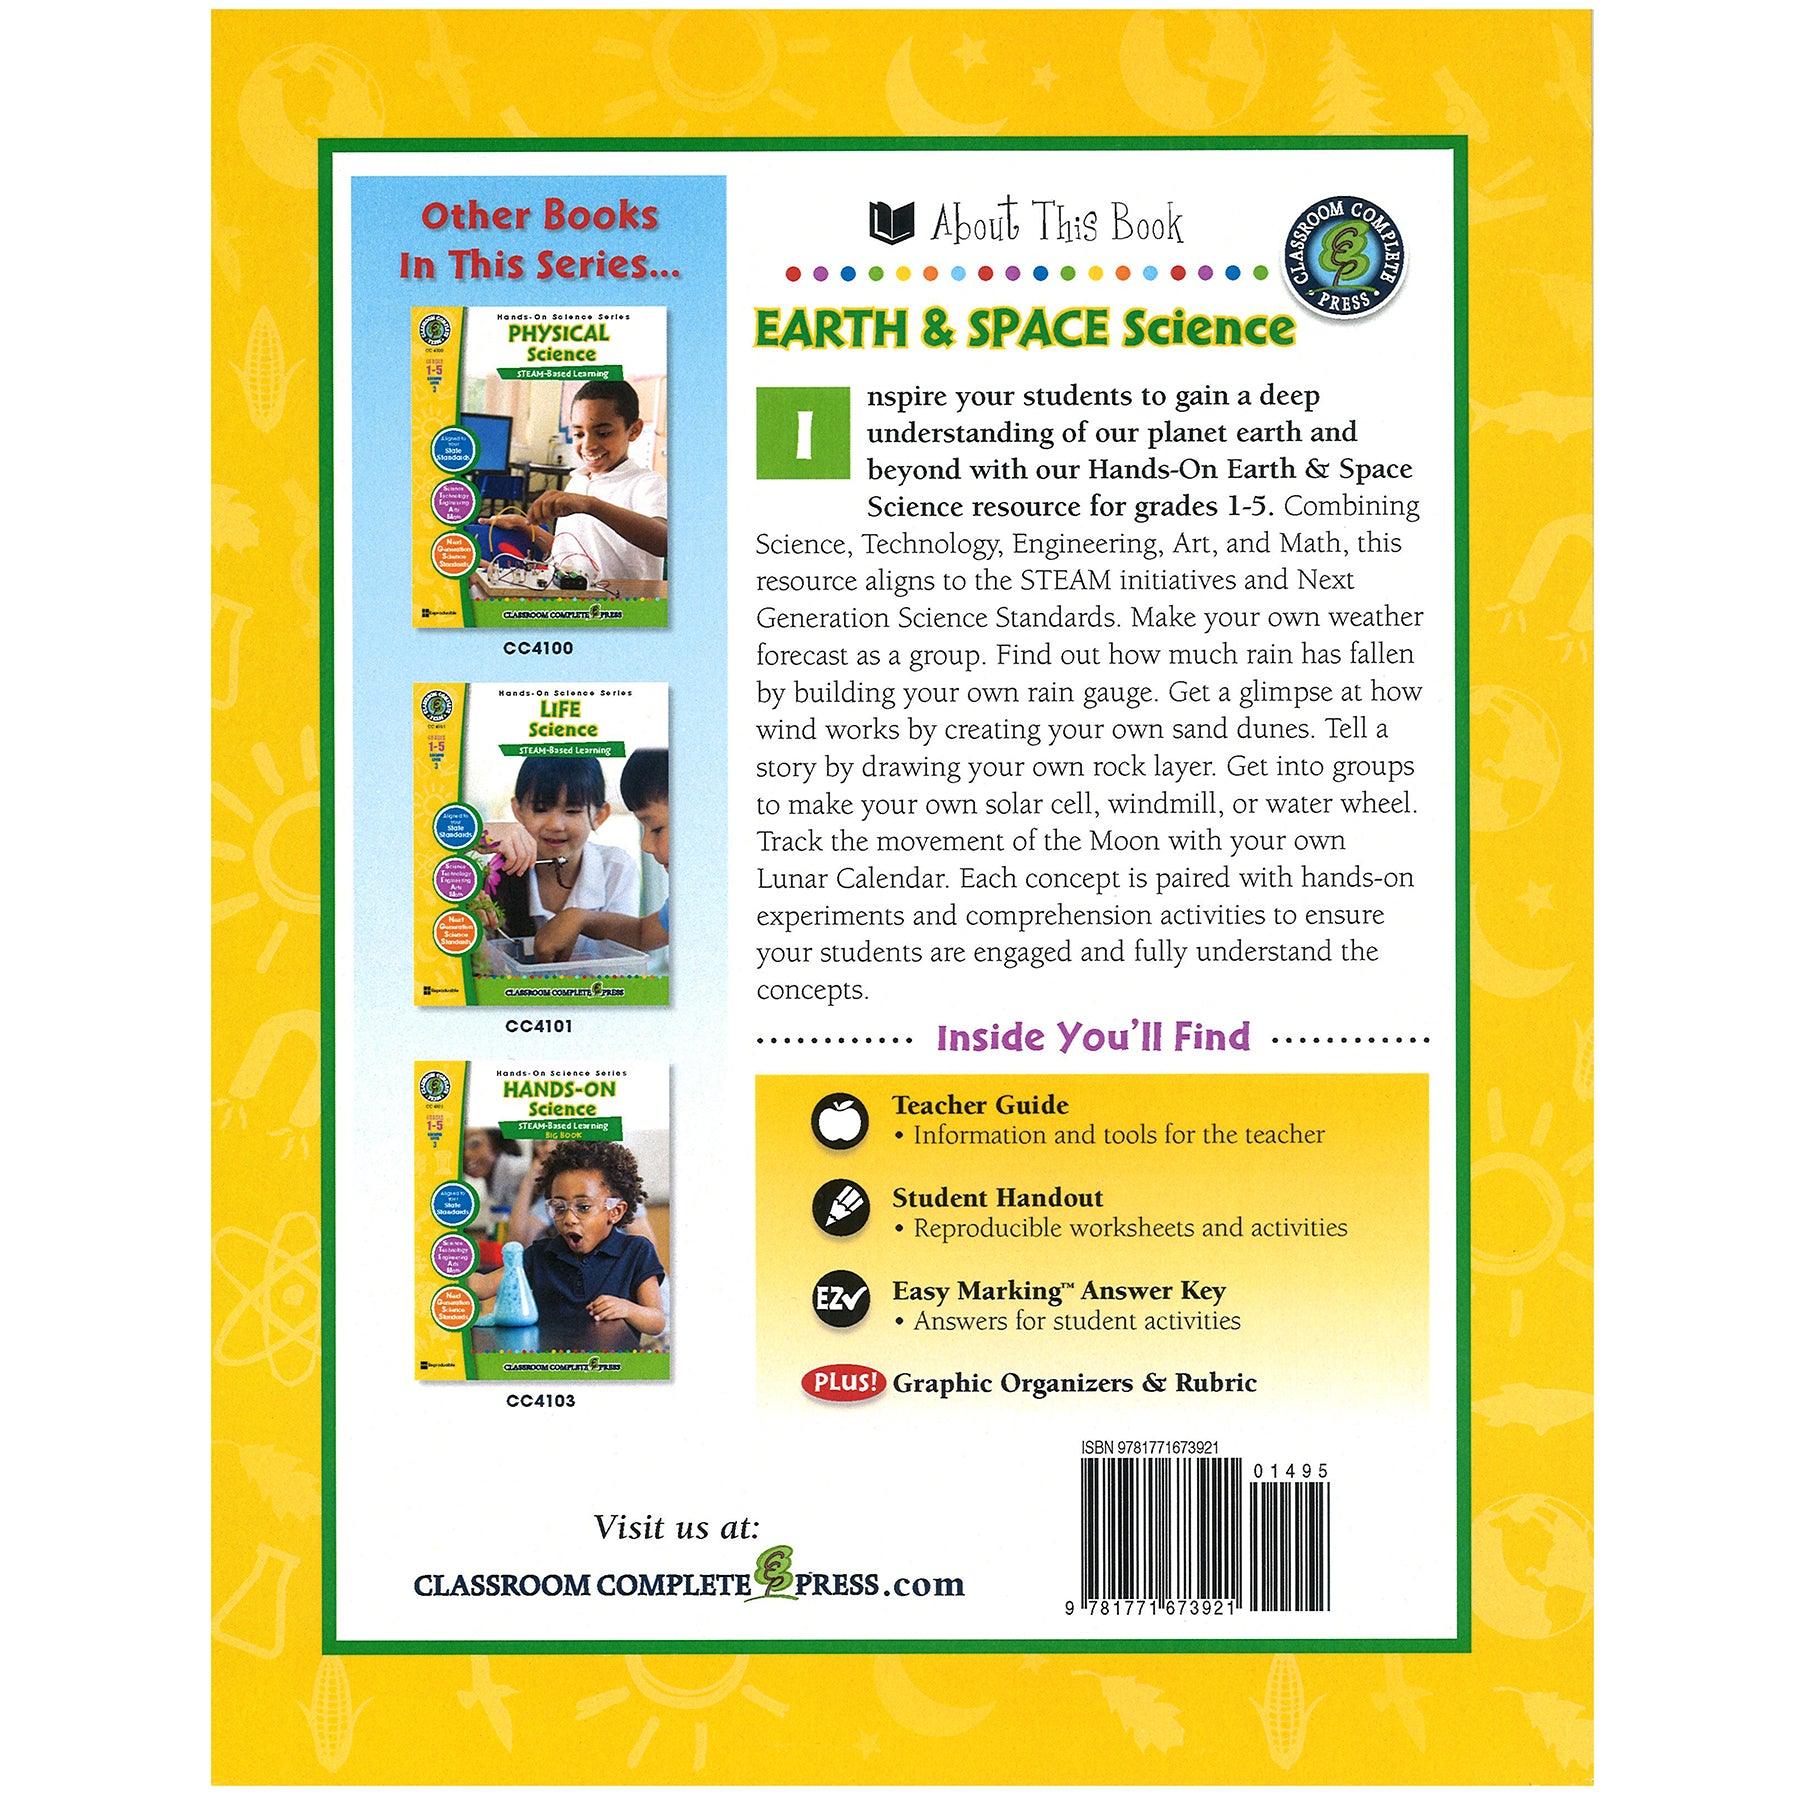 Hands-On STEAM - Earth & Space Science Resource Book, Grade 1-5 - Loomini